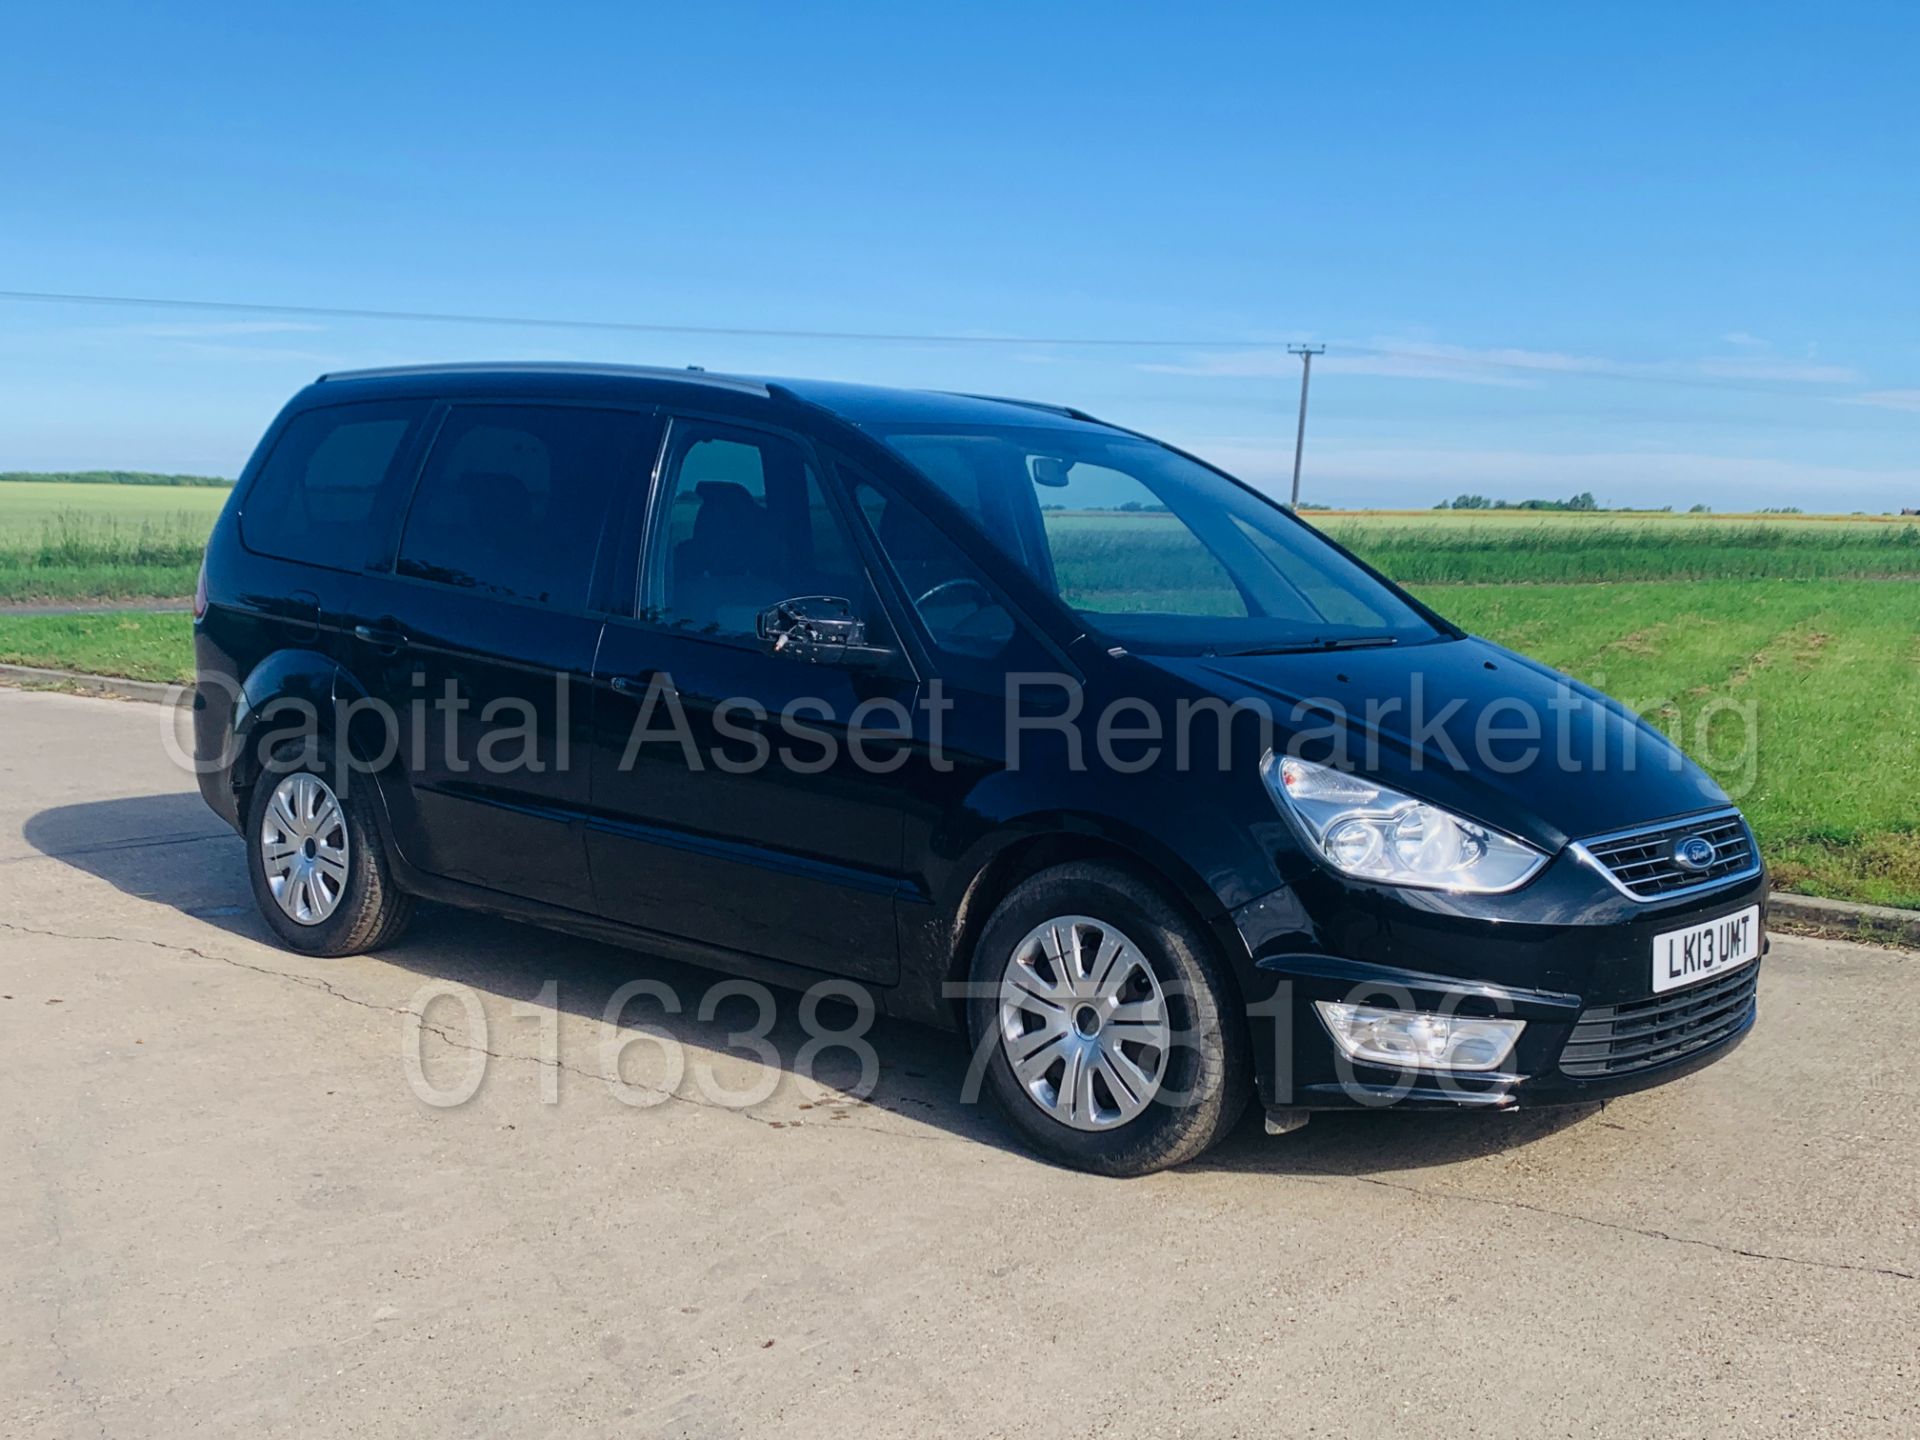 (ON SALE) FORD GALAXY *ZETEC* 7 SEATER MPV (2013) '2.0 TDCI - POWER SHIFT' (NO VAT - SAVE 20%) - Image 7 of 31